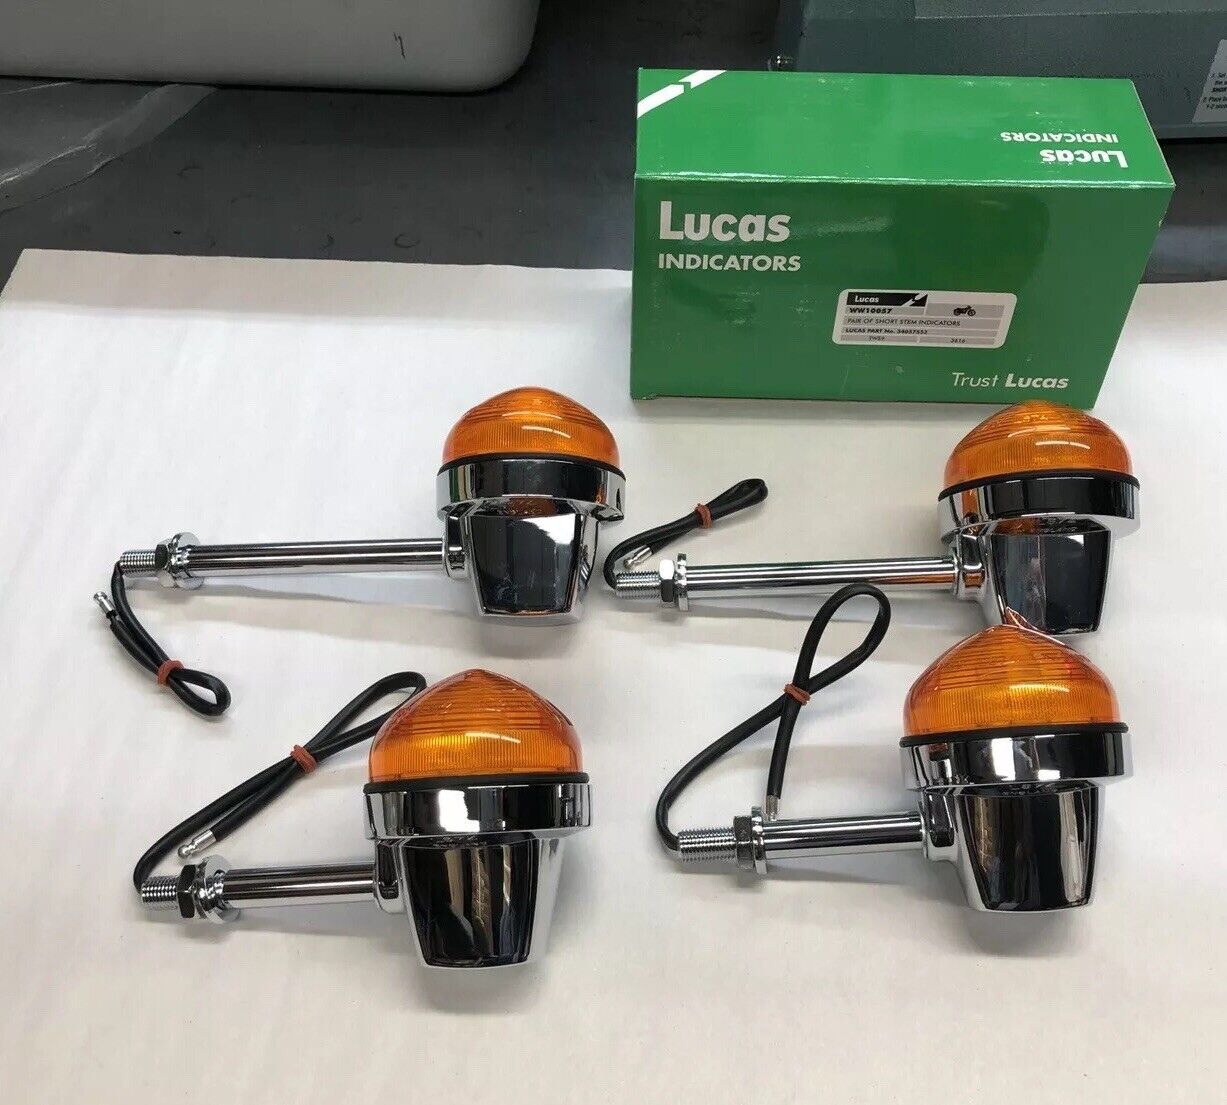 TRIUMPH LUCAS BLINKERS TURN SIGNALS SET OF 4 NEW! MADE IN UK